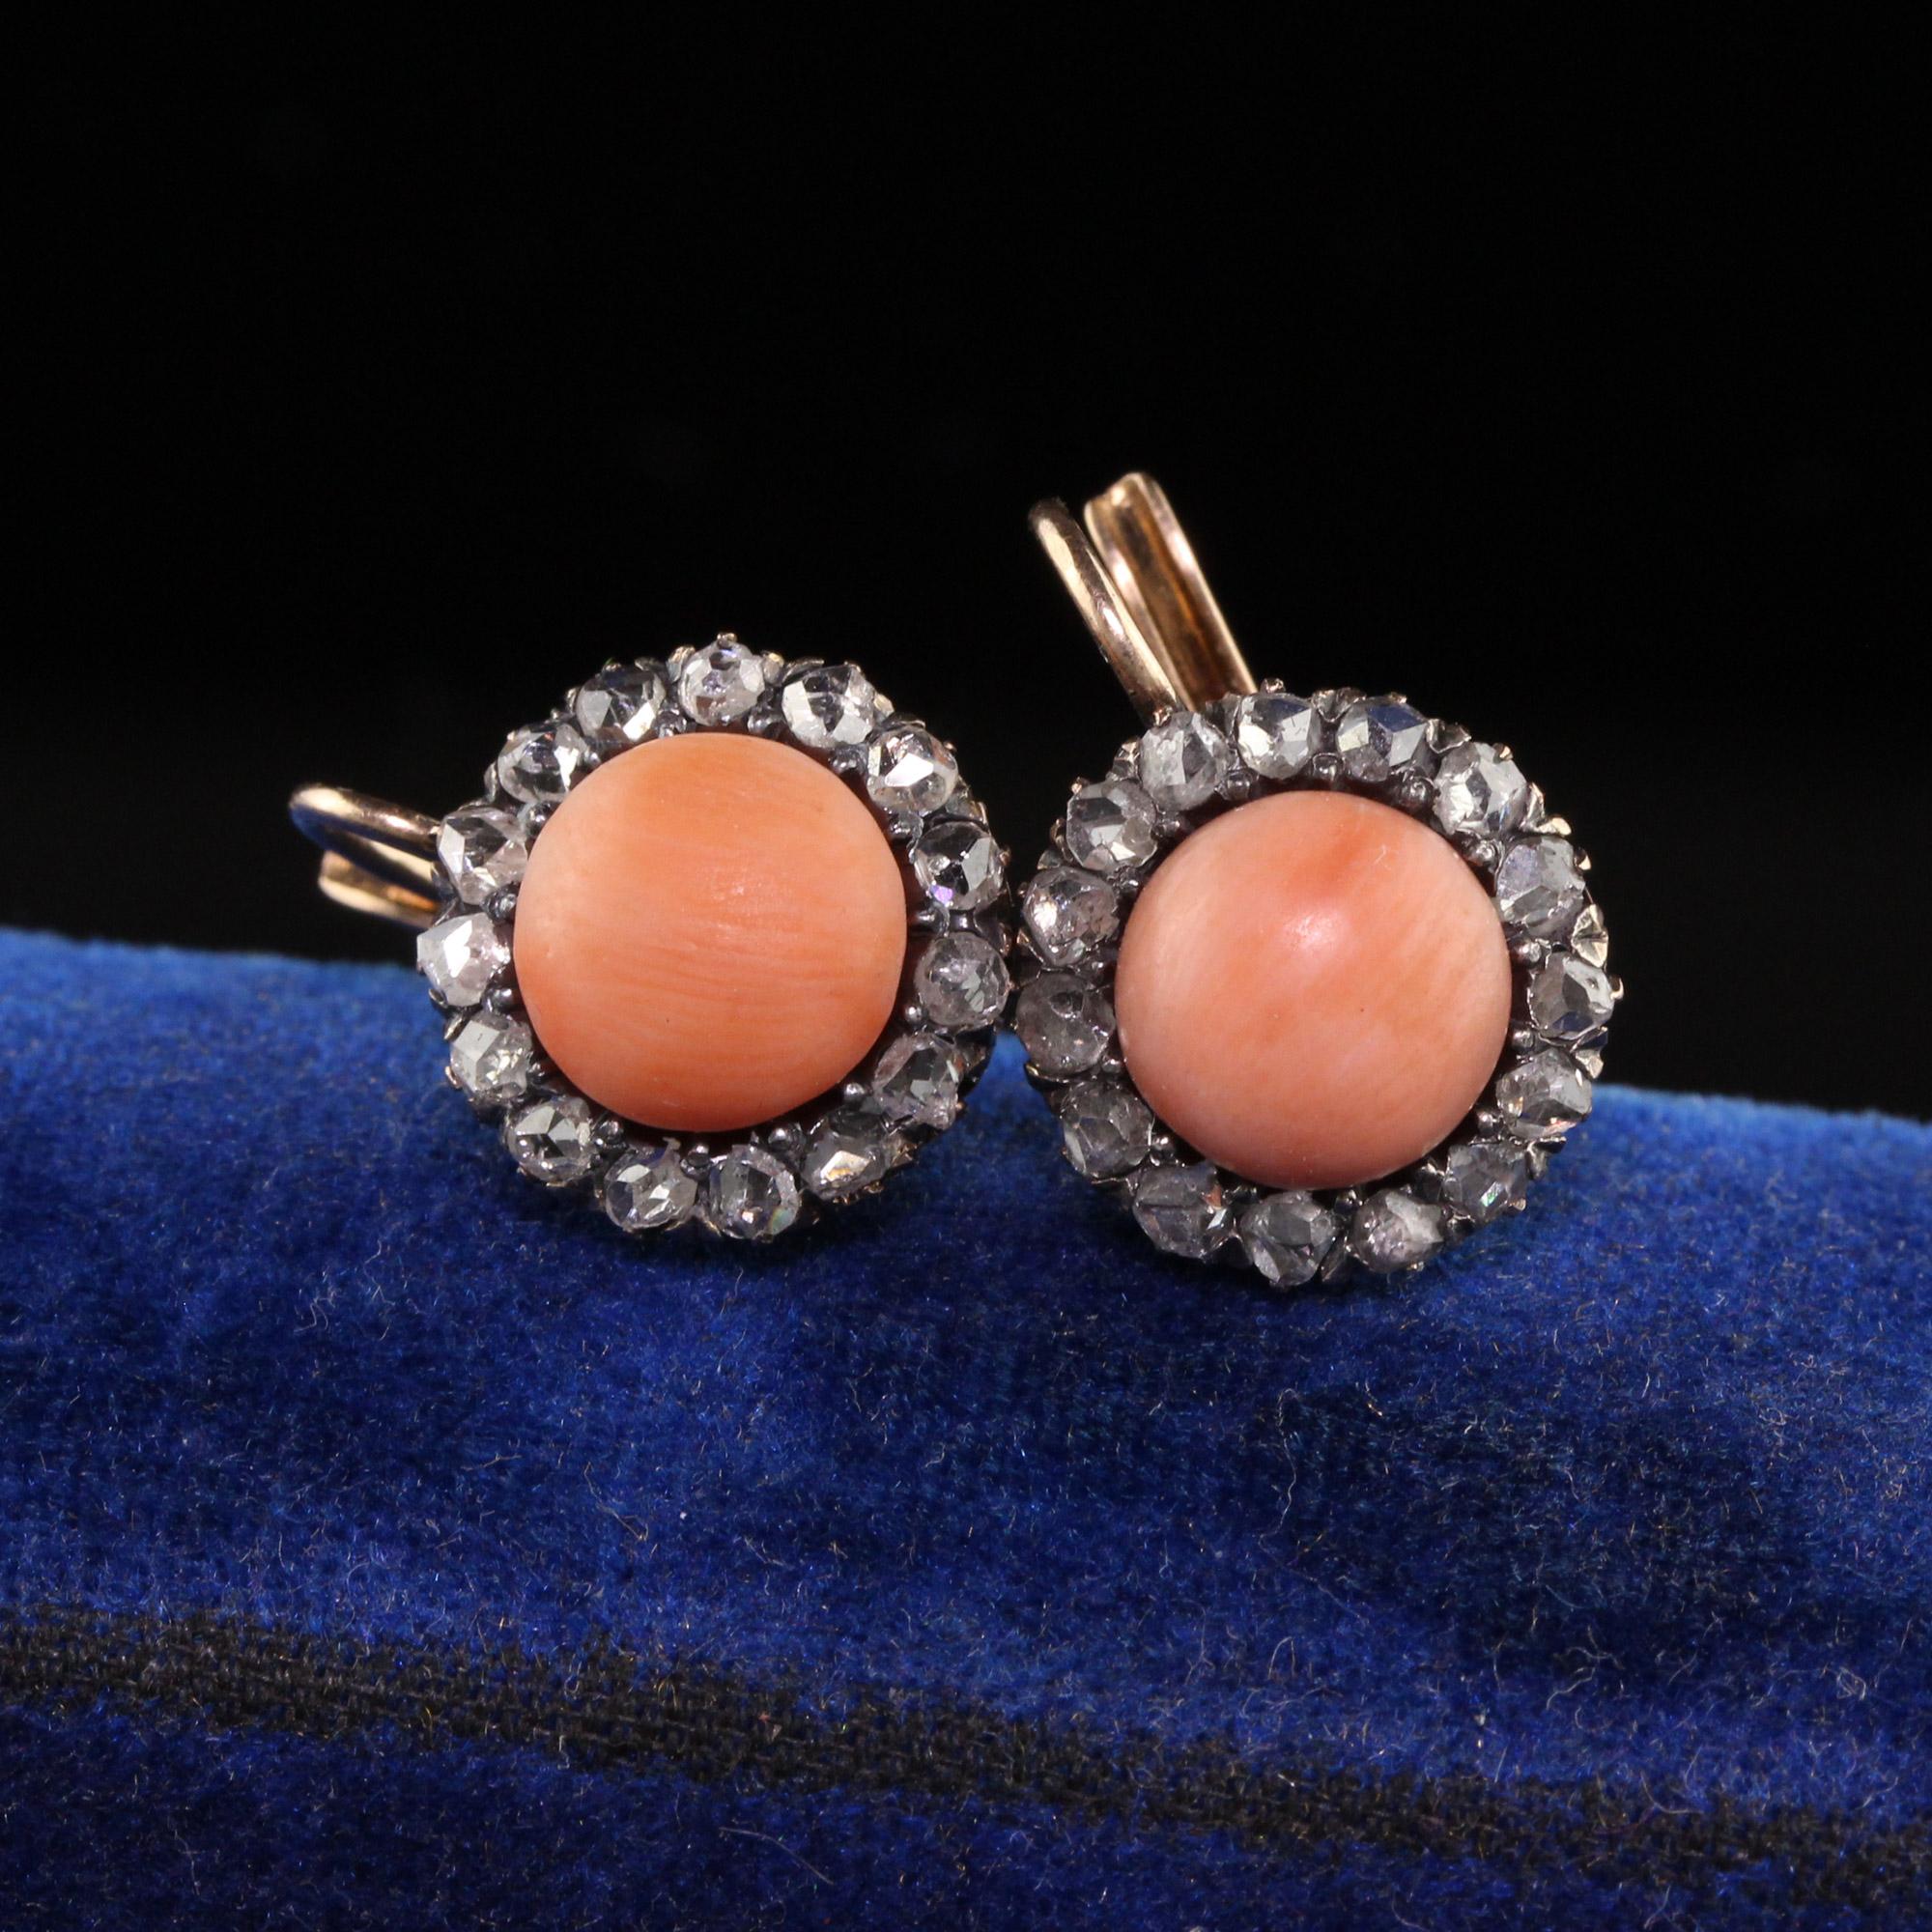 Beautiful Antique Victorian 18K Yellow Gold Rose Cut Diamond Halo Coral Drop Earrings. These gorgeous pair of earrings are crafted in 18k yellow gold. The center of the earrings hold natural corals and are surrounded by beautifully cut rose cut